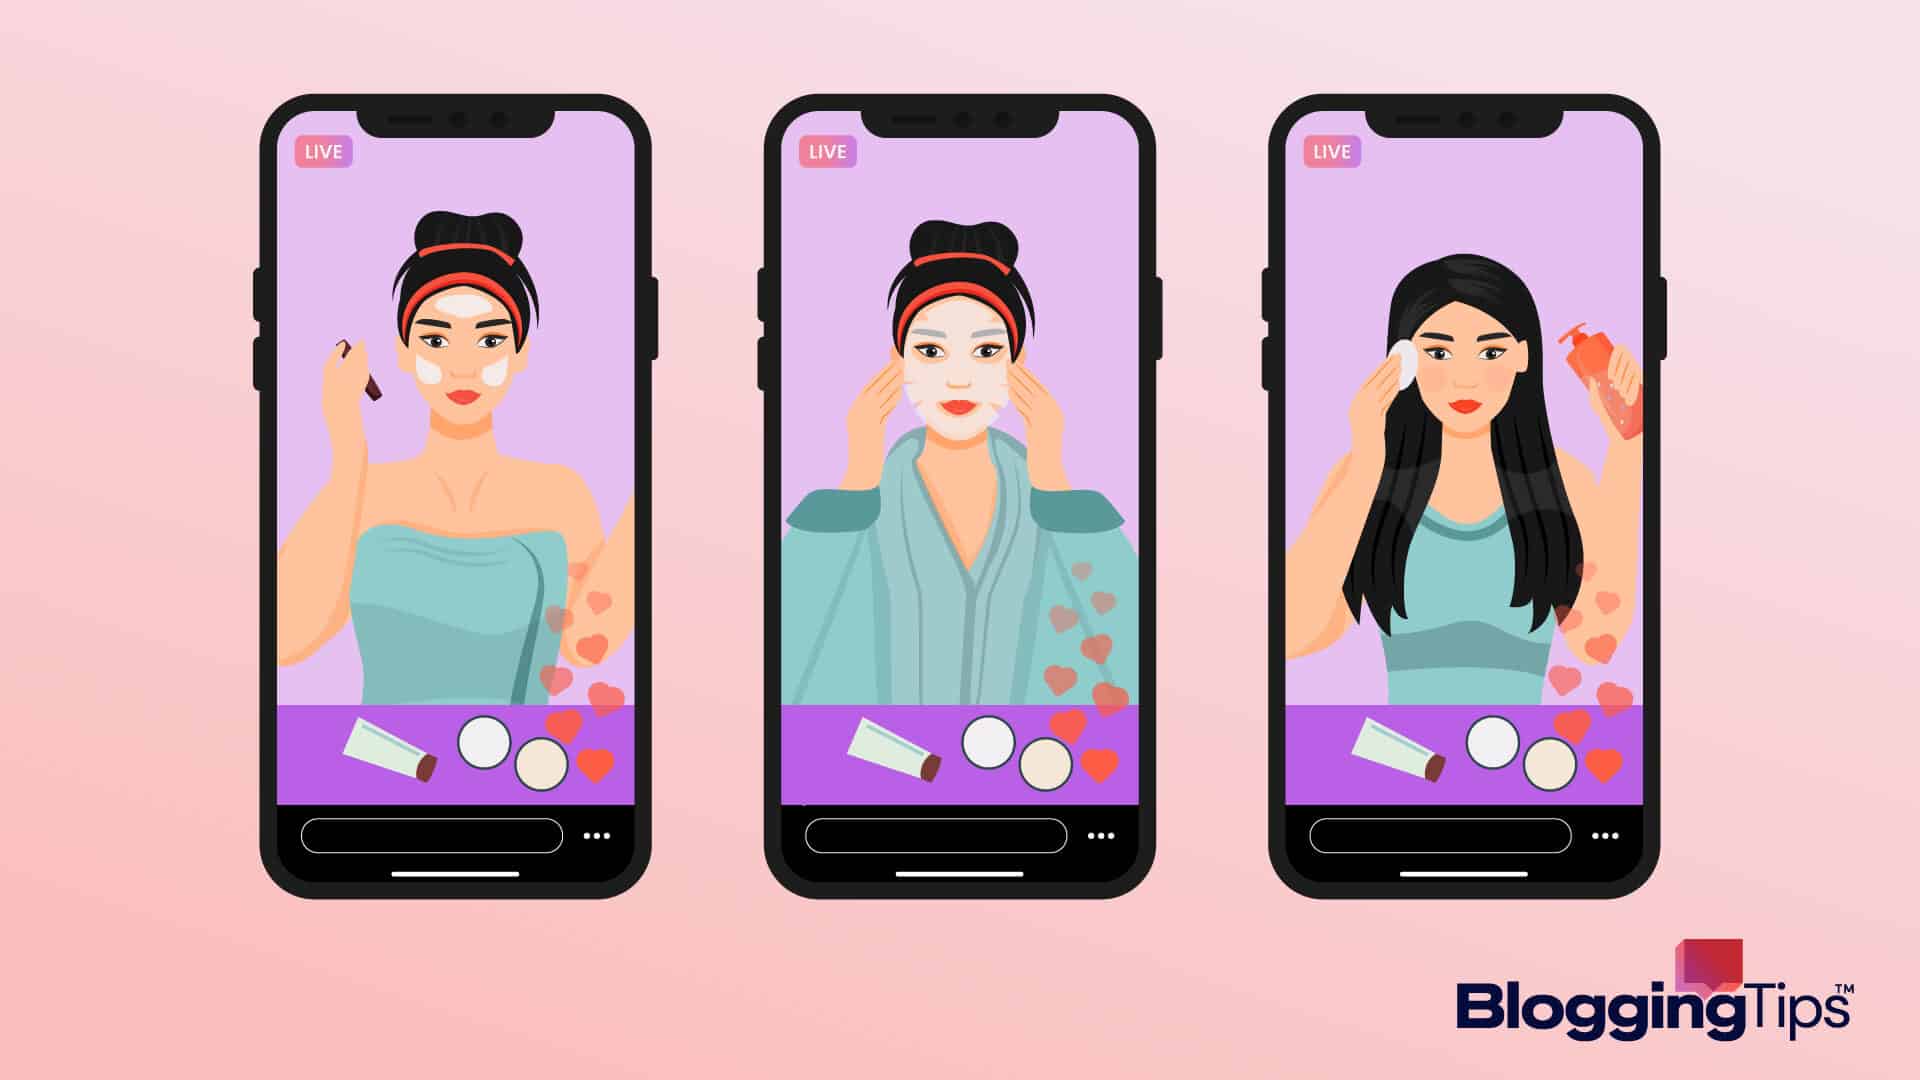 vector graphic showing an illustration of a woman getting ready for Instagram live